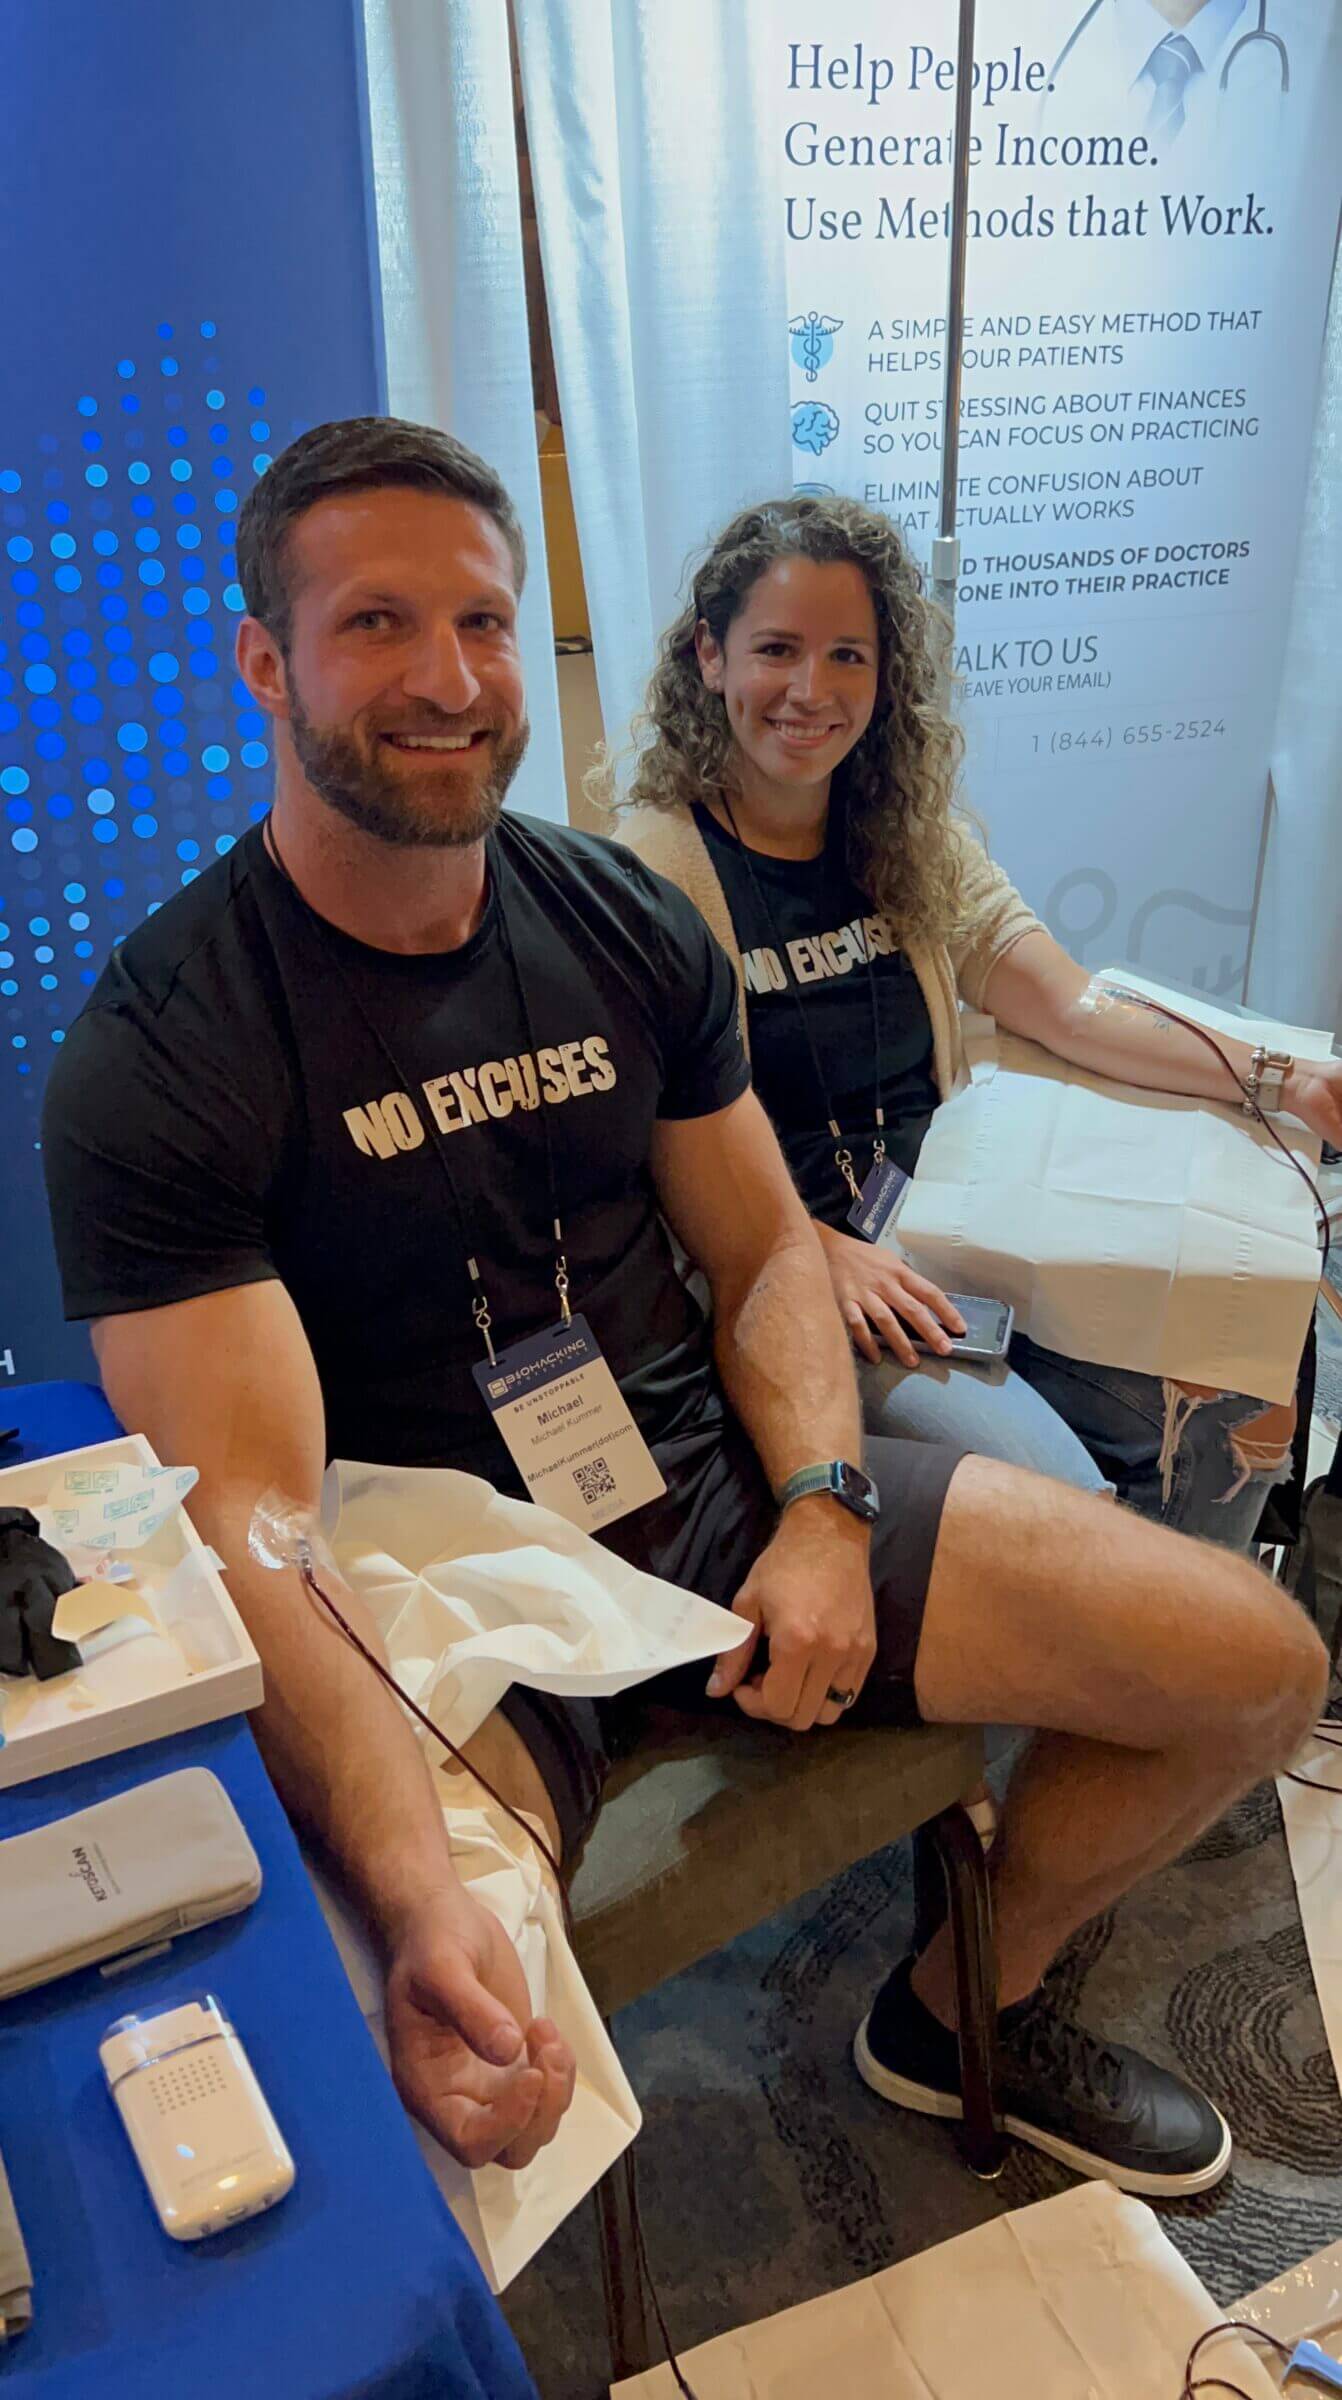 My wife and I got our first ozone IV at a Biohacking conference.